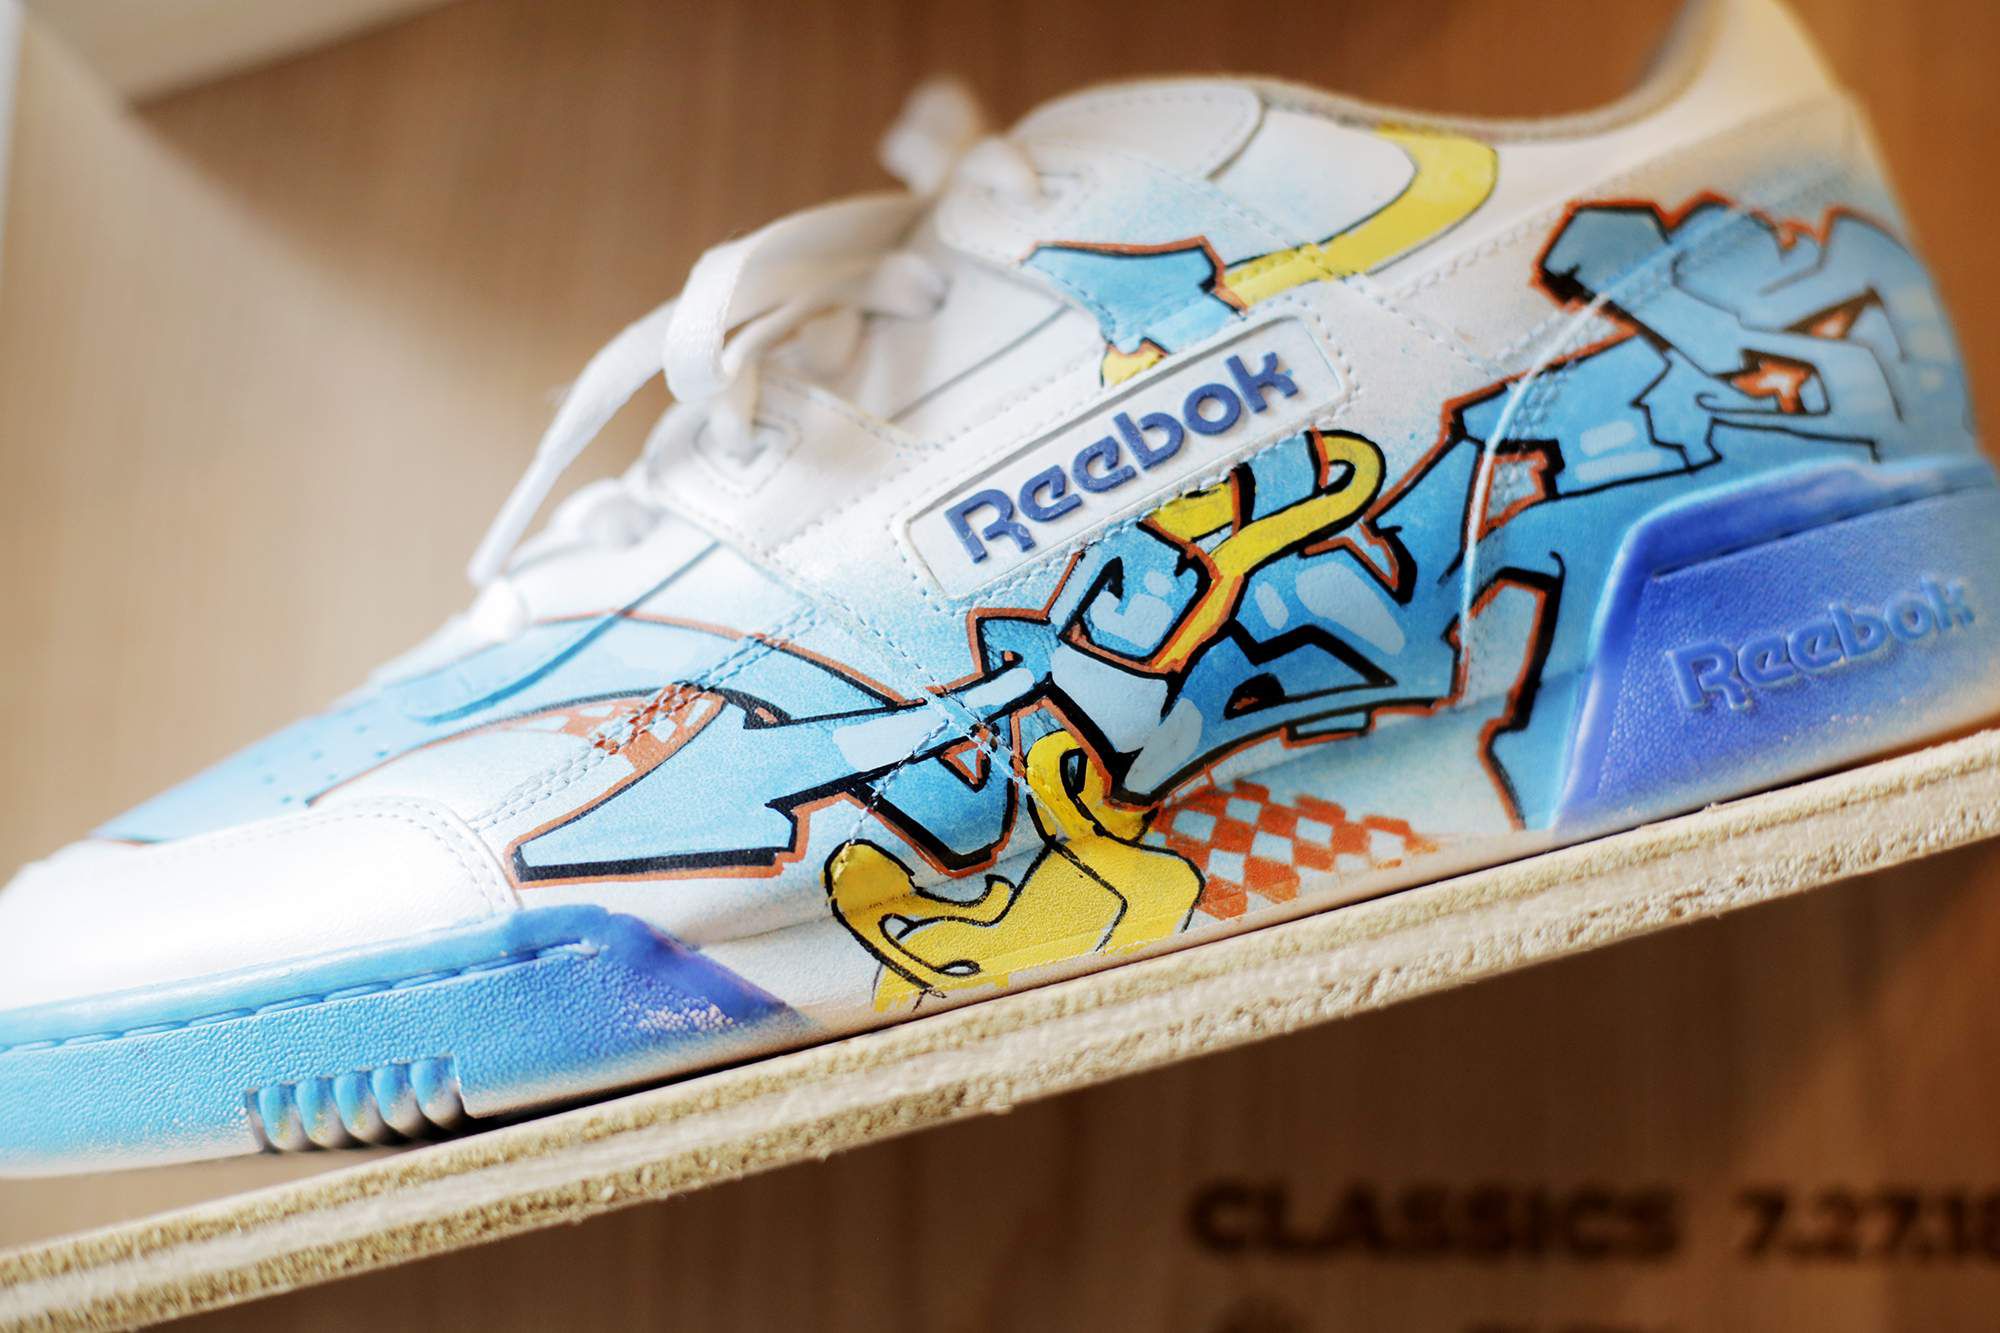 Legendary graffiti artists painted sneakers to sell display in (with